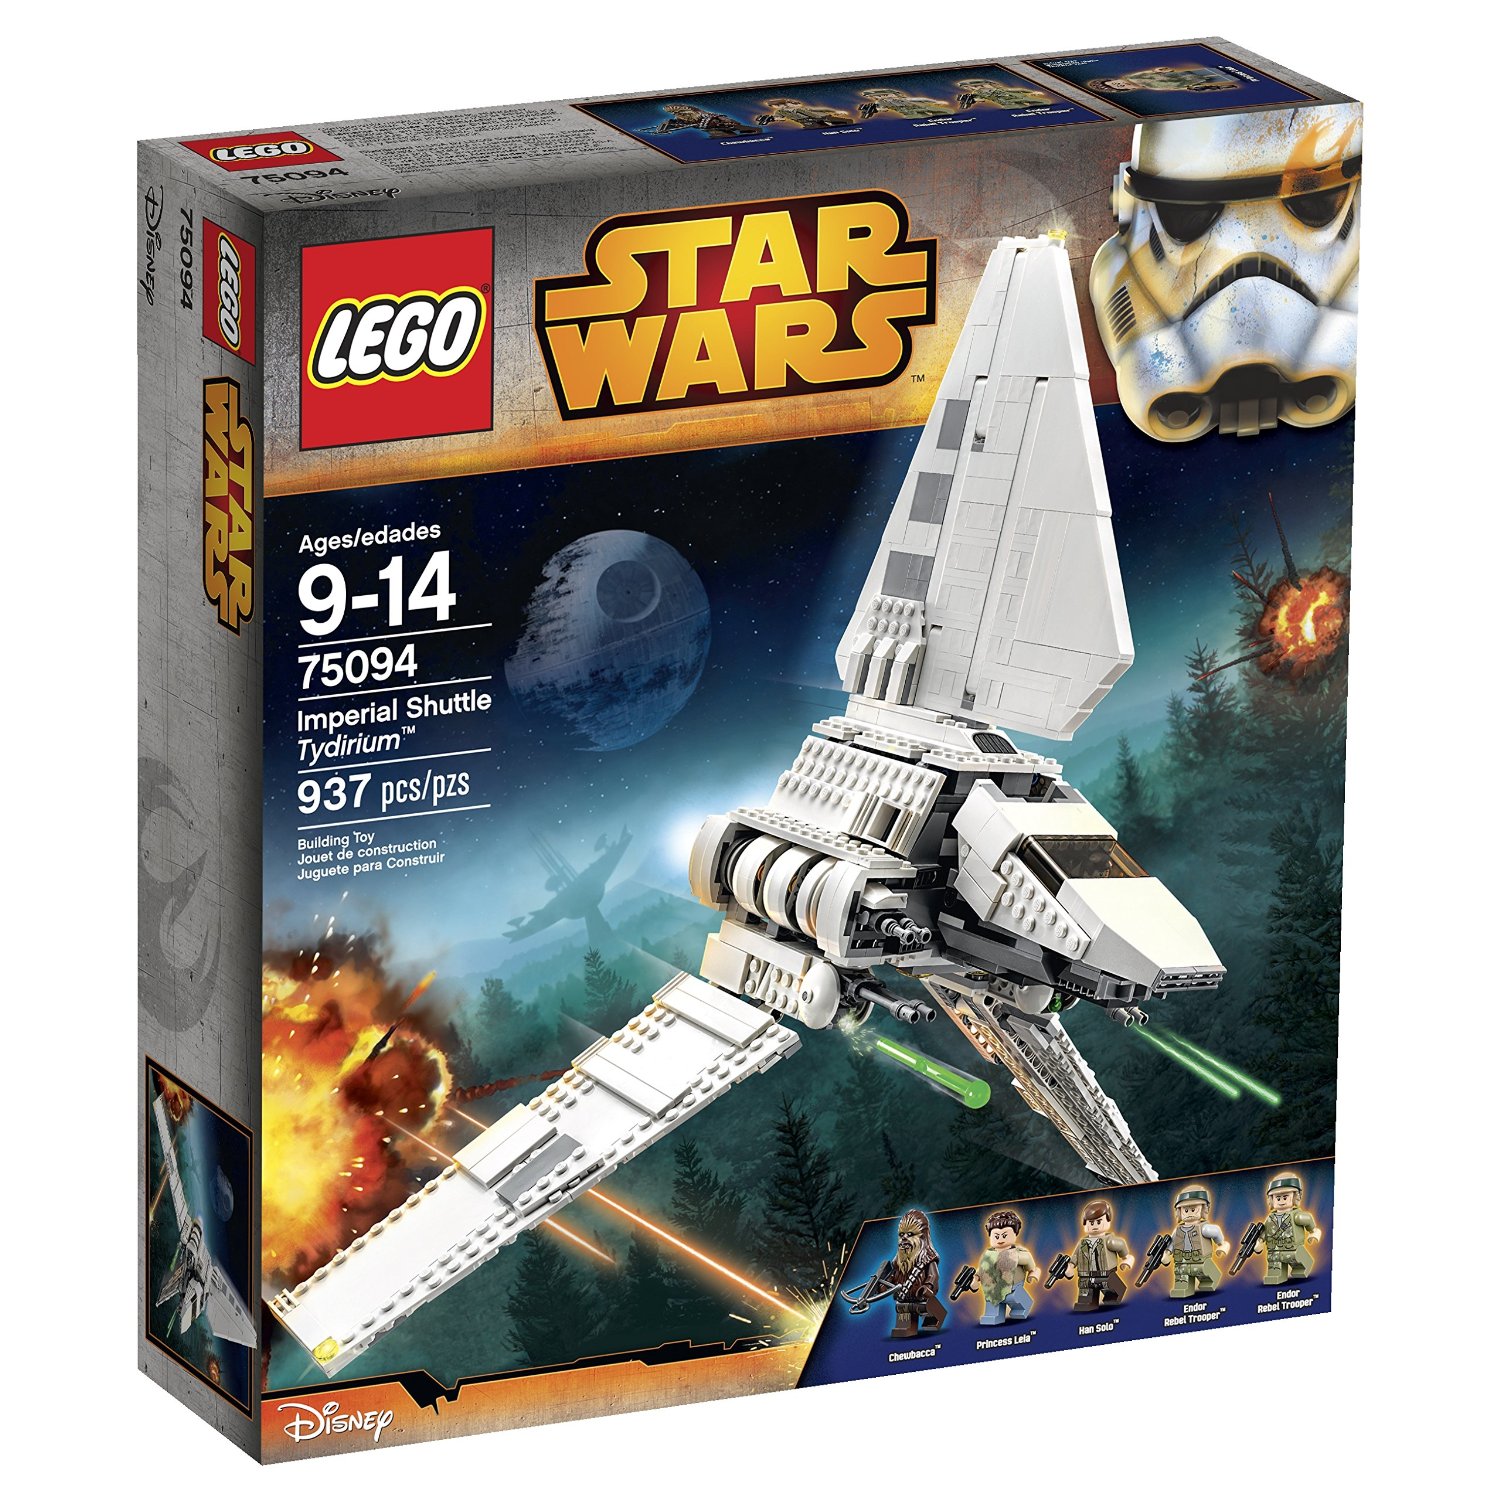 LEGO Star Wars Summer 2015 Sets Available for Order! - Bricks and Bloks